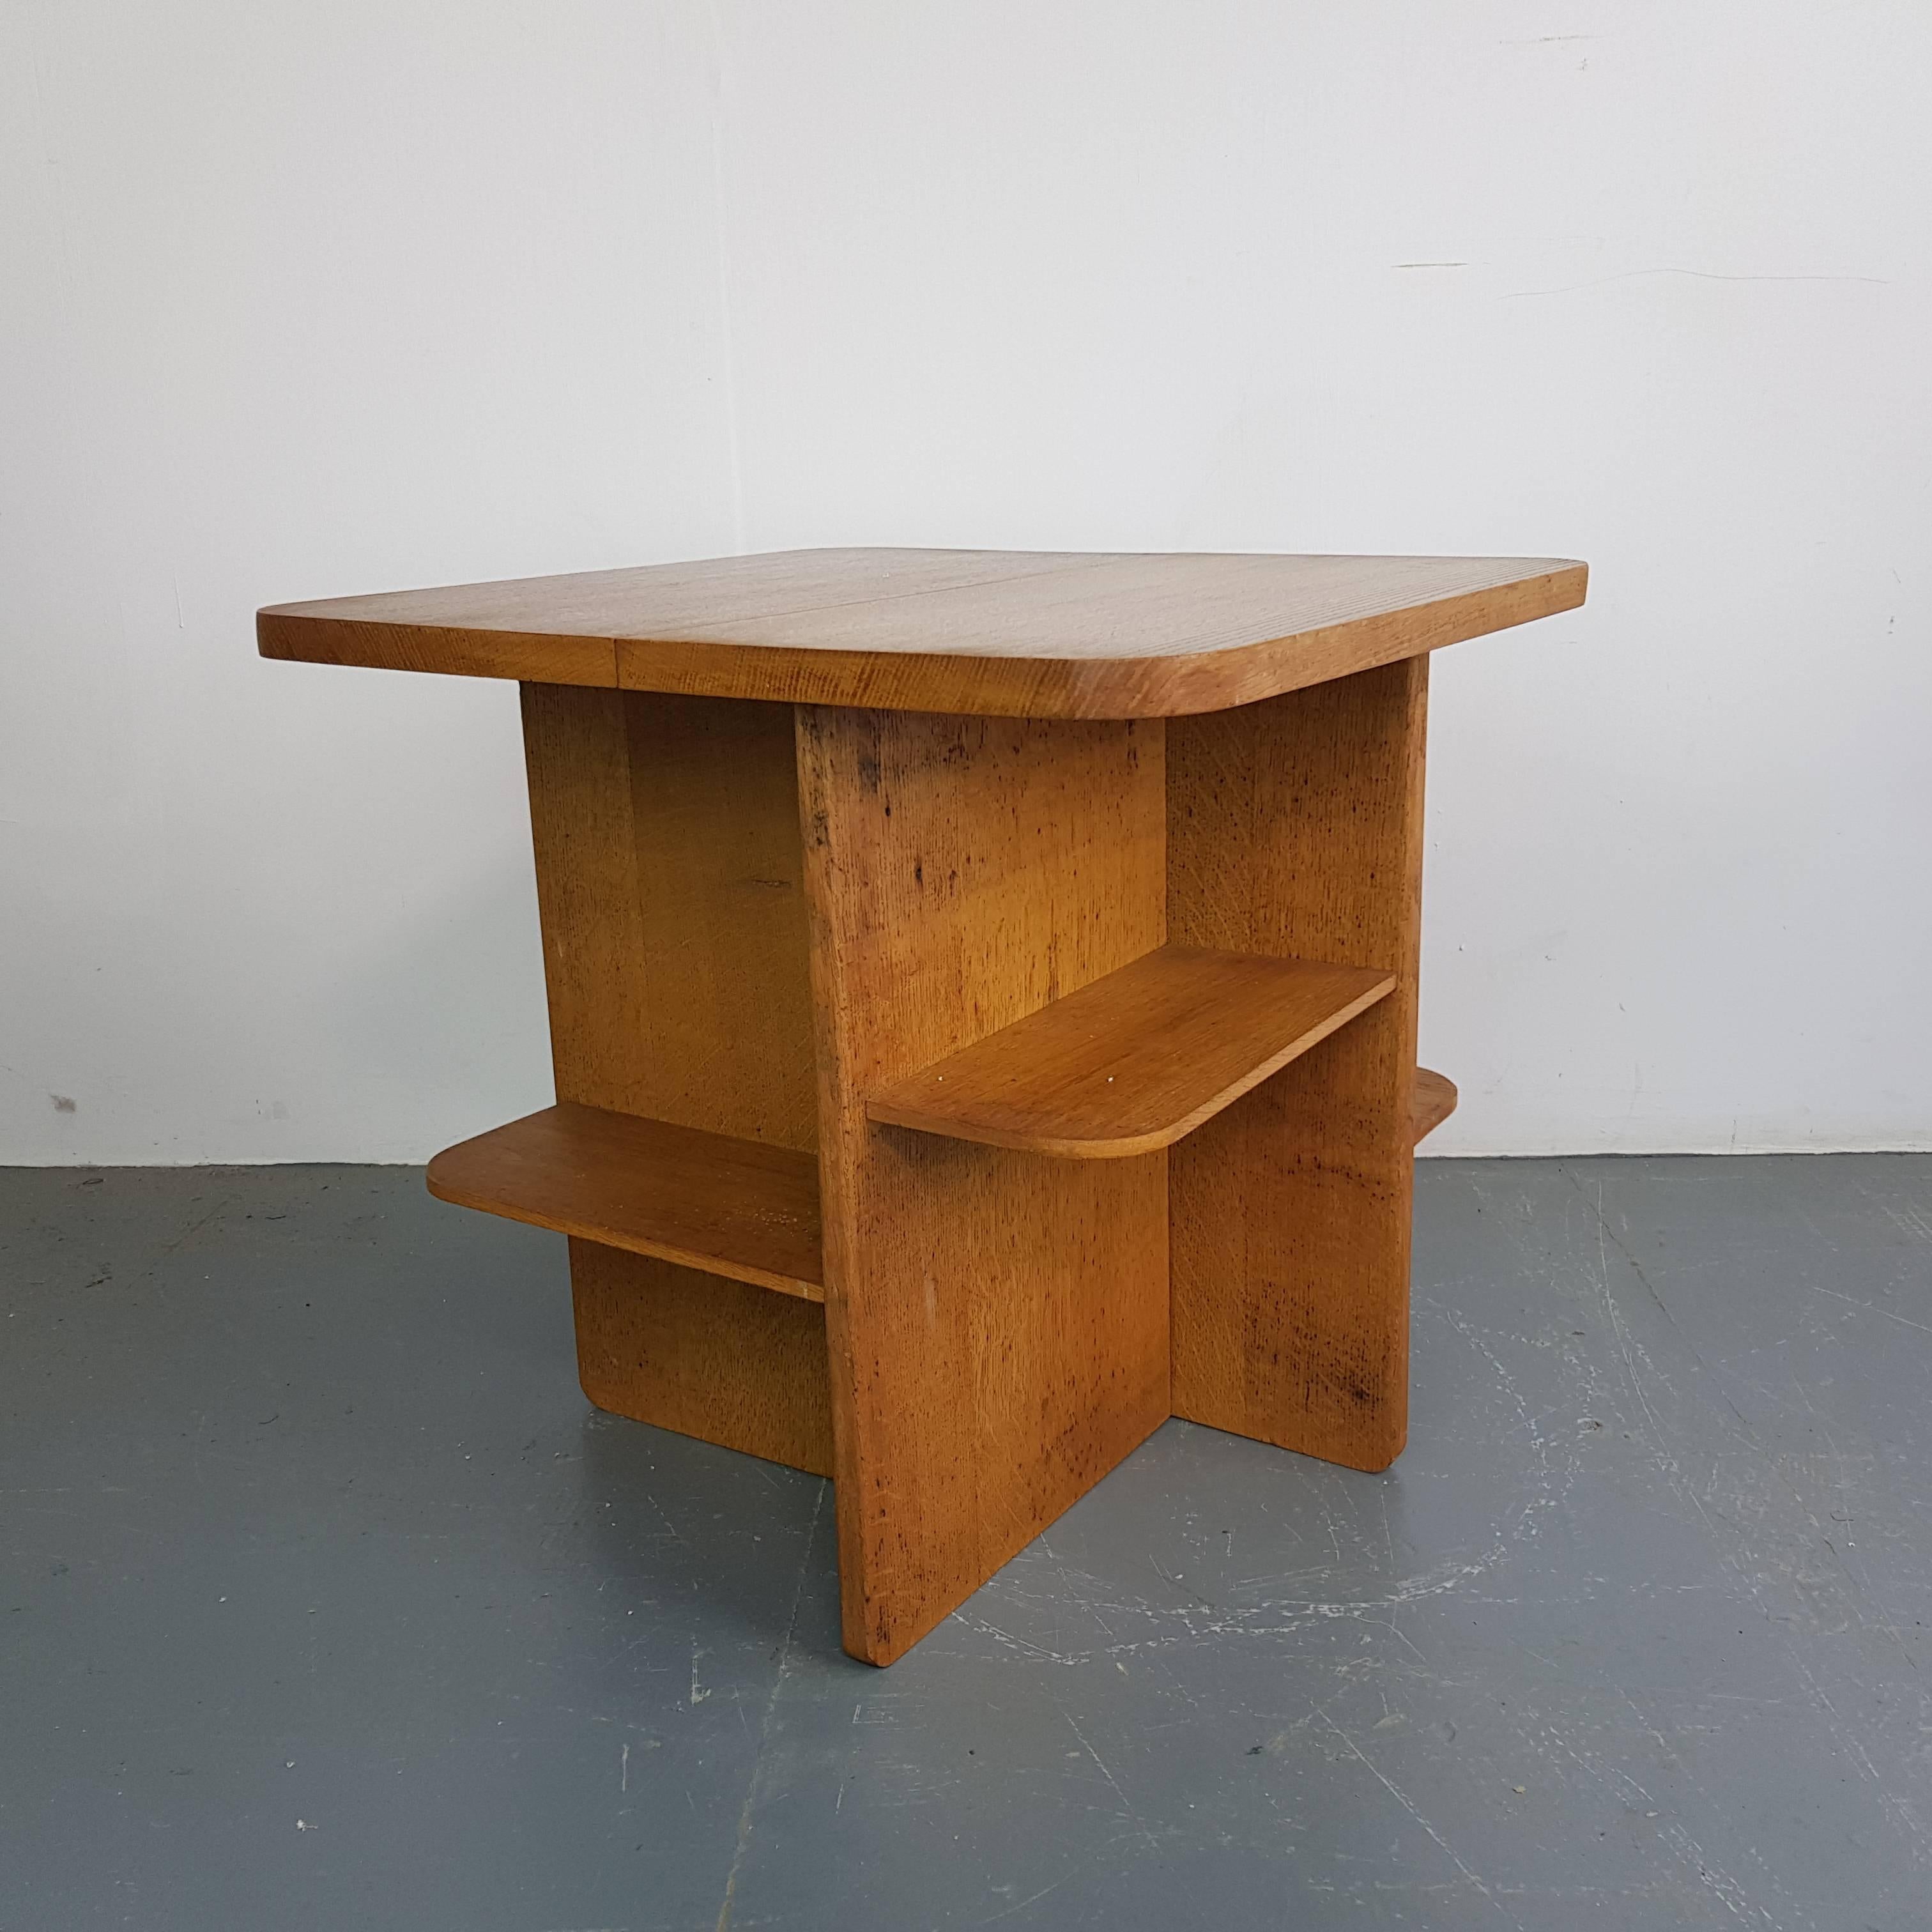 Unusual square coffee table / side table with a finish look about it.

In good vintage condition, with some wear commensurate with age and use, but nothing specific to mention.

Approximate dimensions:

Depth 61 cm

Width 61 cm

Height 56